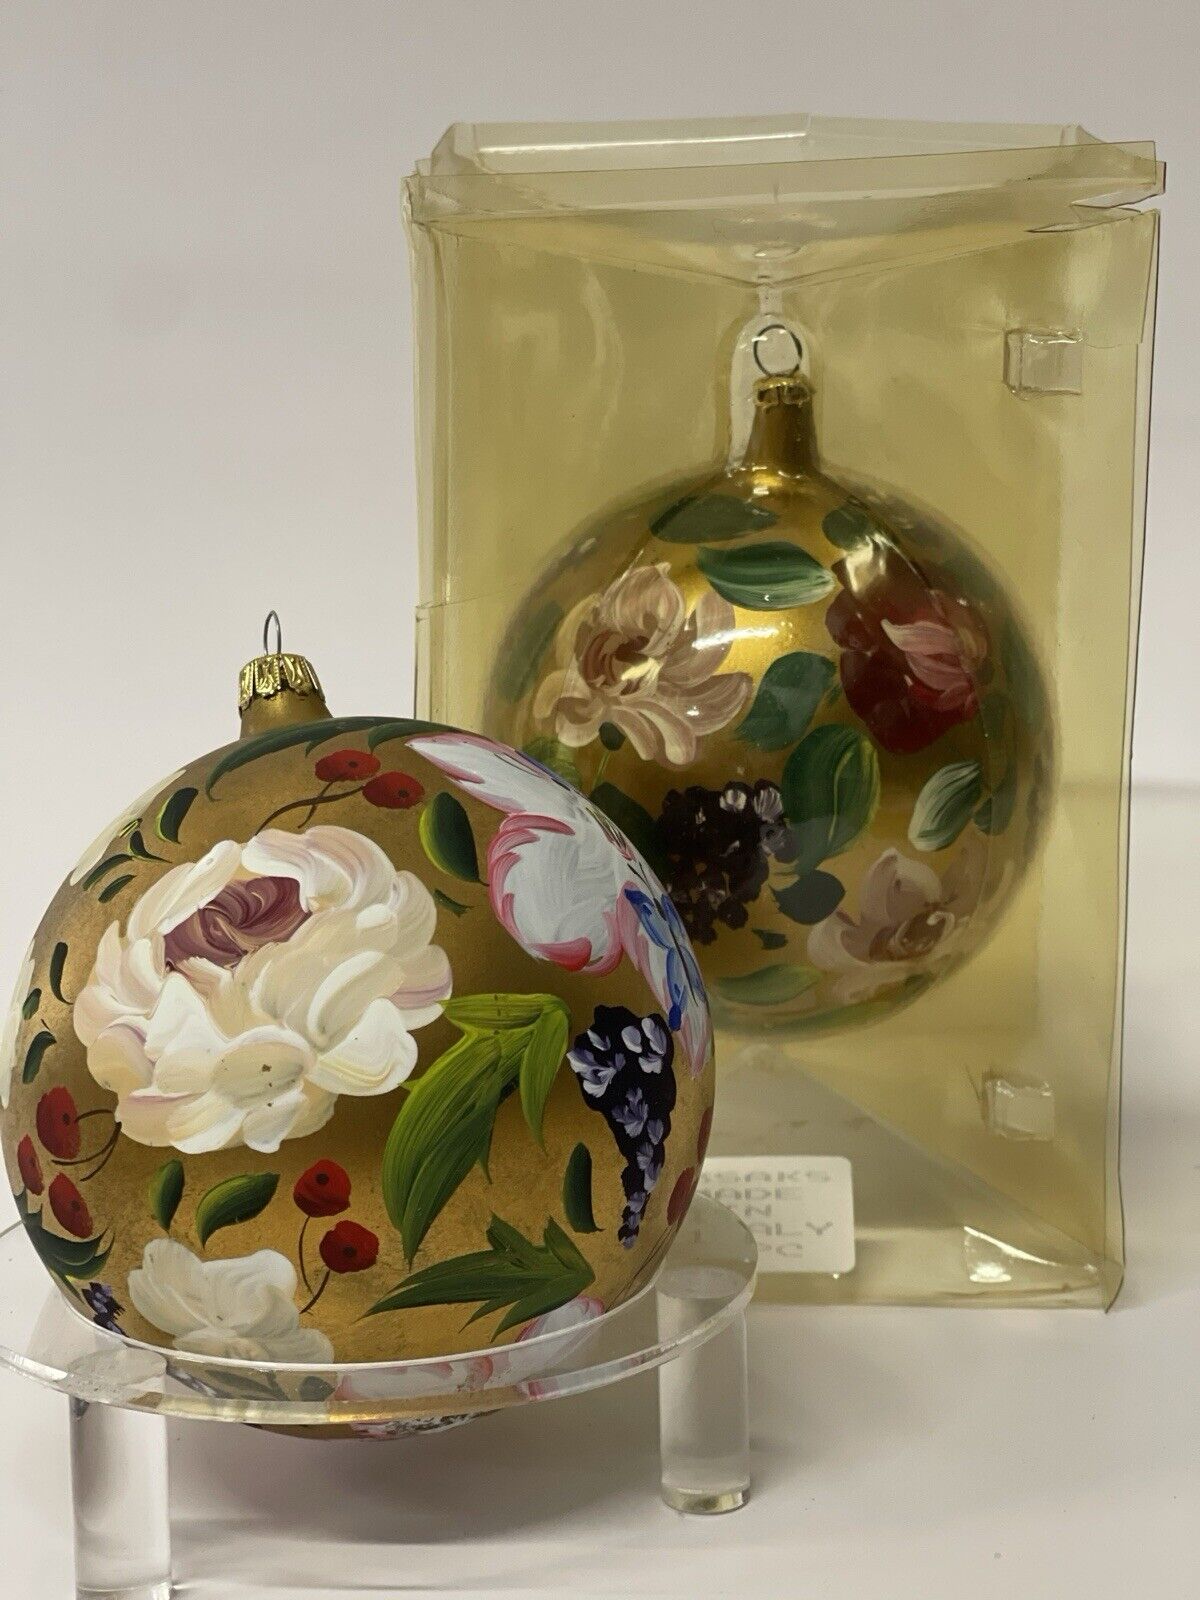 Lot Of 2 Vintage Saks Fifth Avenue Annual Christmas Ball Ornaments, 1995